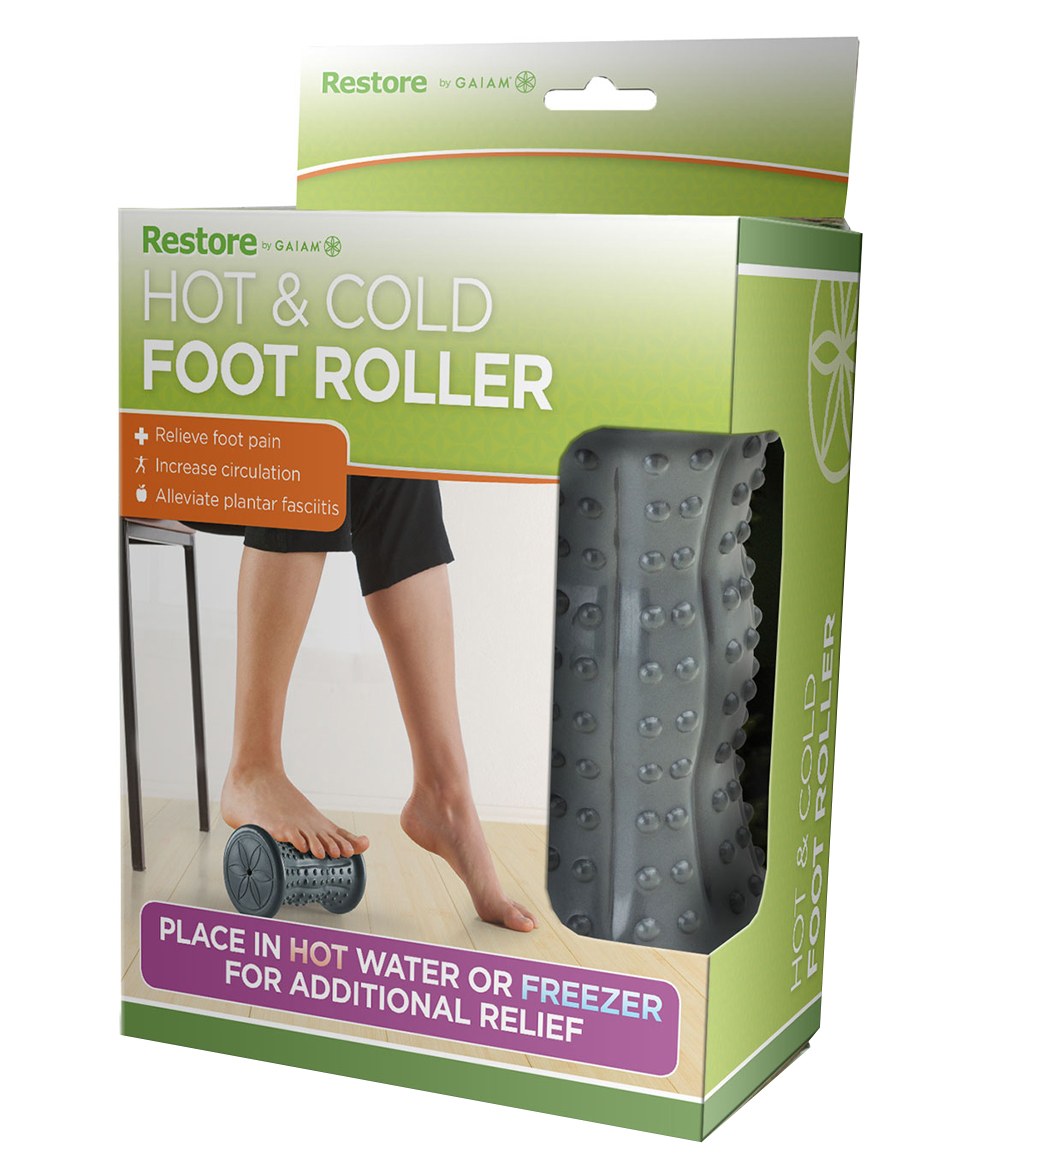 Gaiam Restore Hot & Cold Foot Roller at